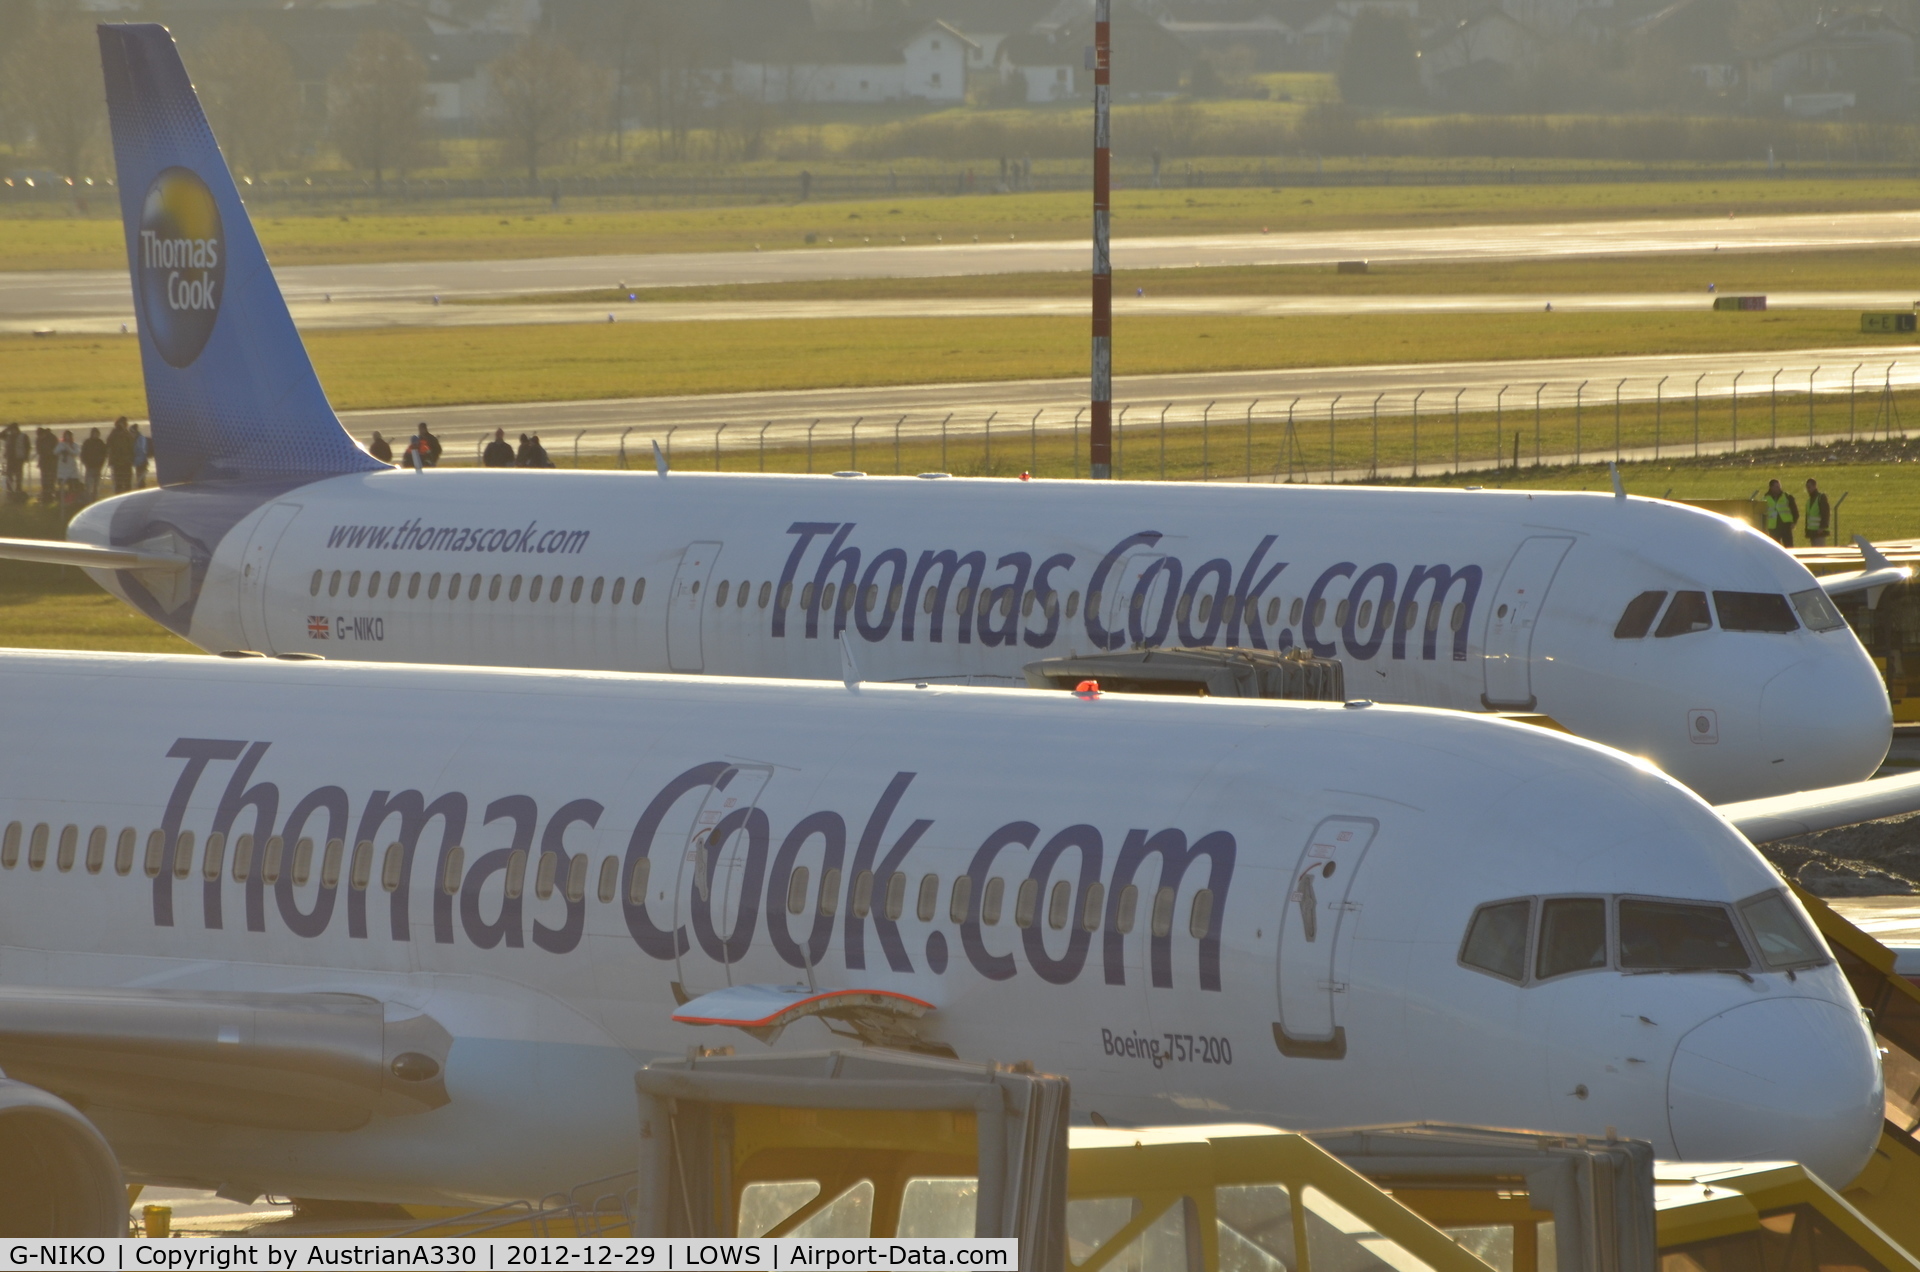 G-NIKO, 2000 Airbus A321-211 C/N 1250, Lots of Thomas Cook airplanes visited LOWSthat day...